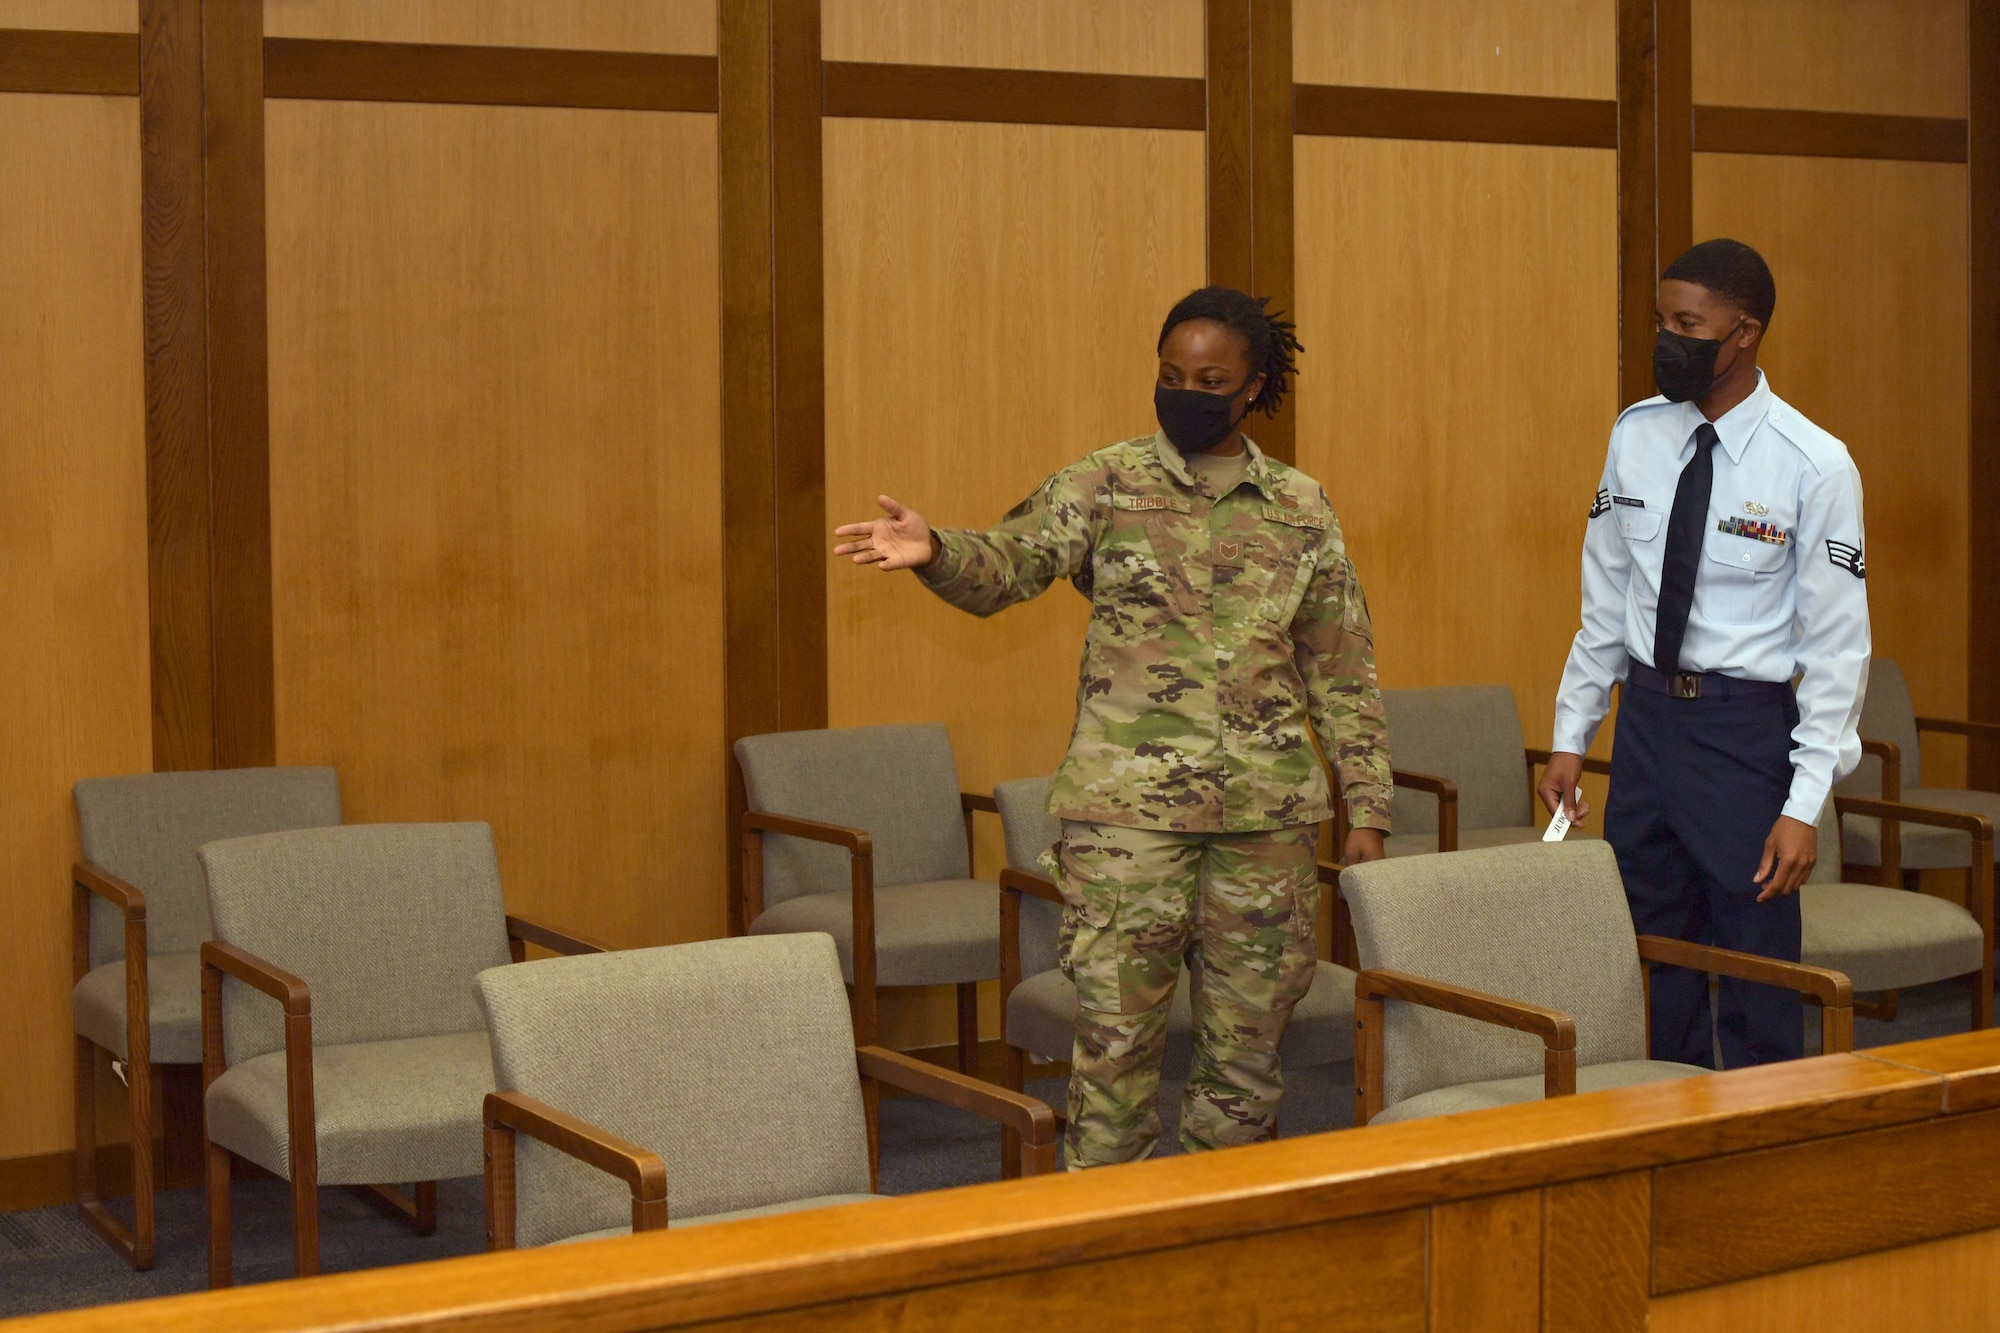 Two Airmen standing in a court room.